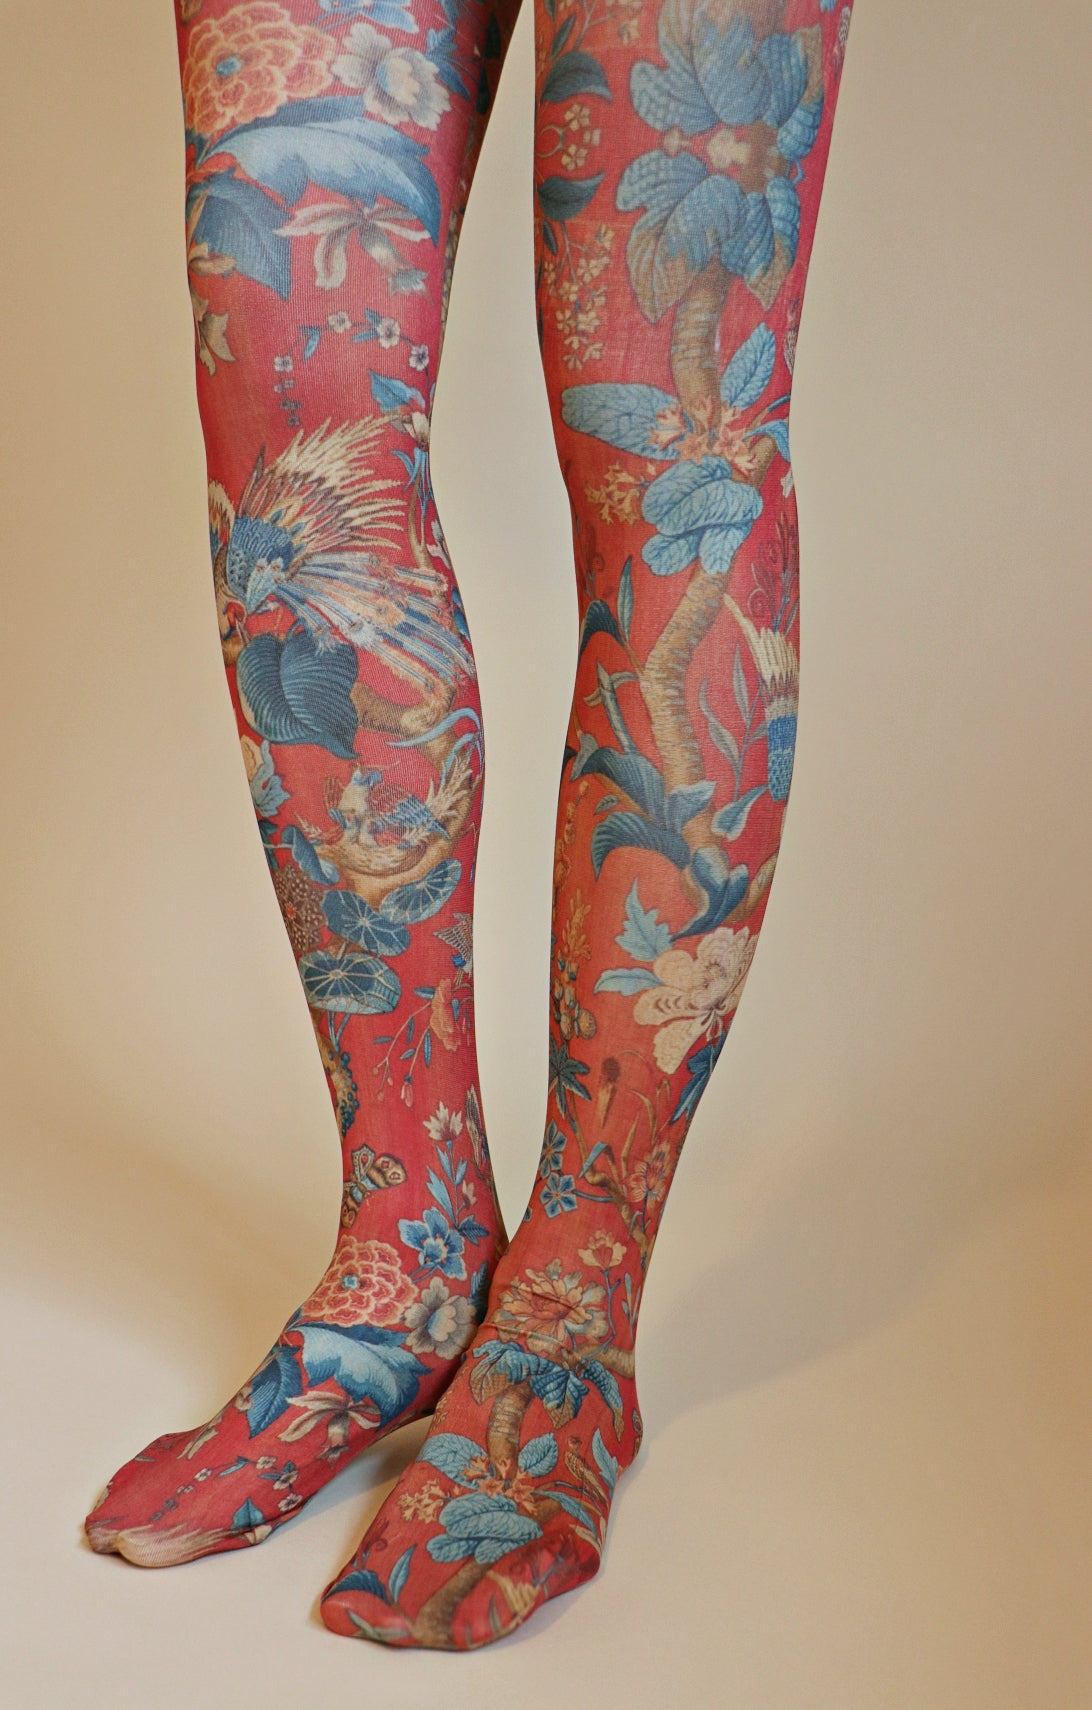 Overall reddish fabric with large light blue and ivory colored floral patterns throughout the tights.